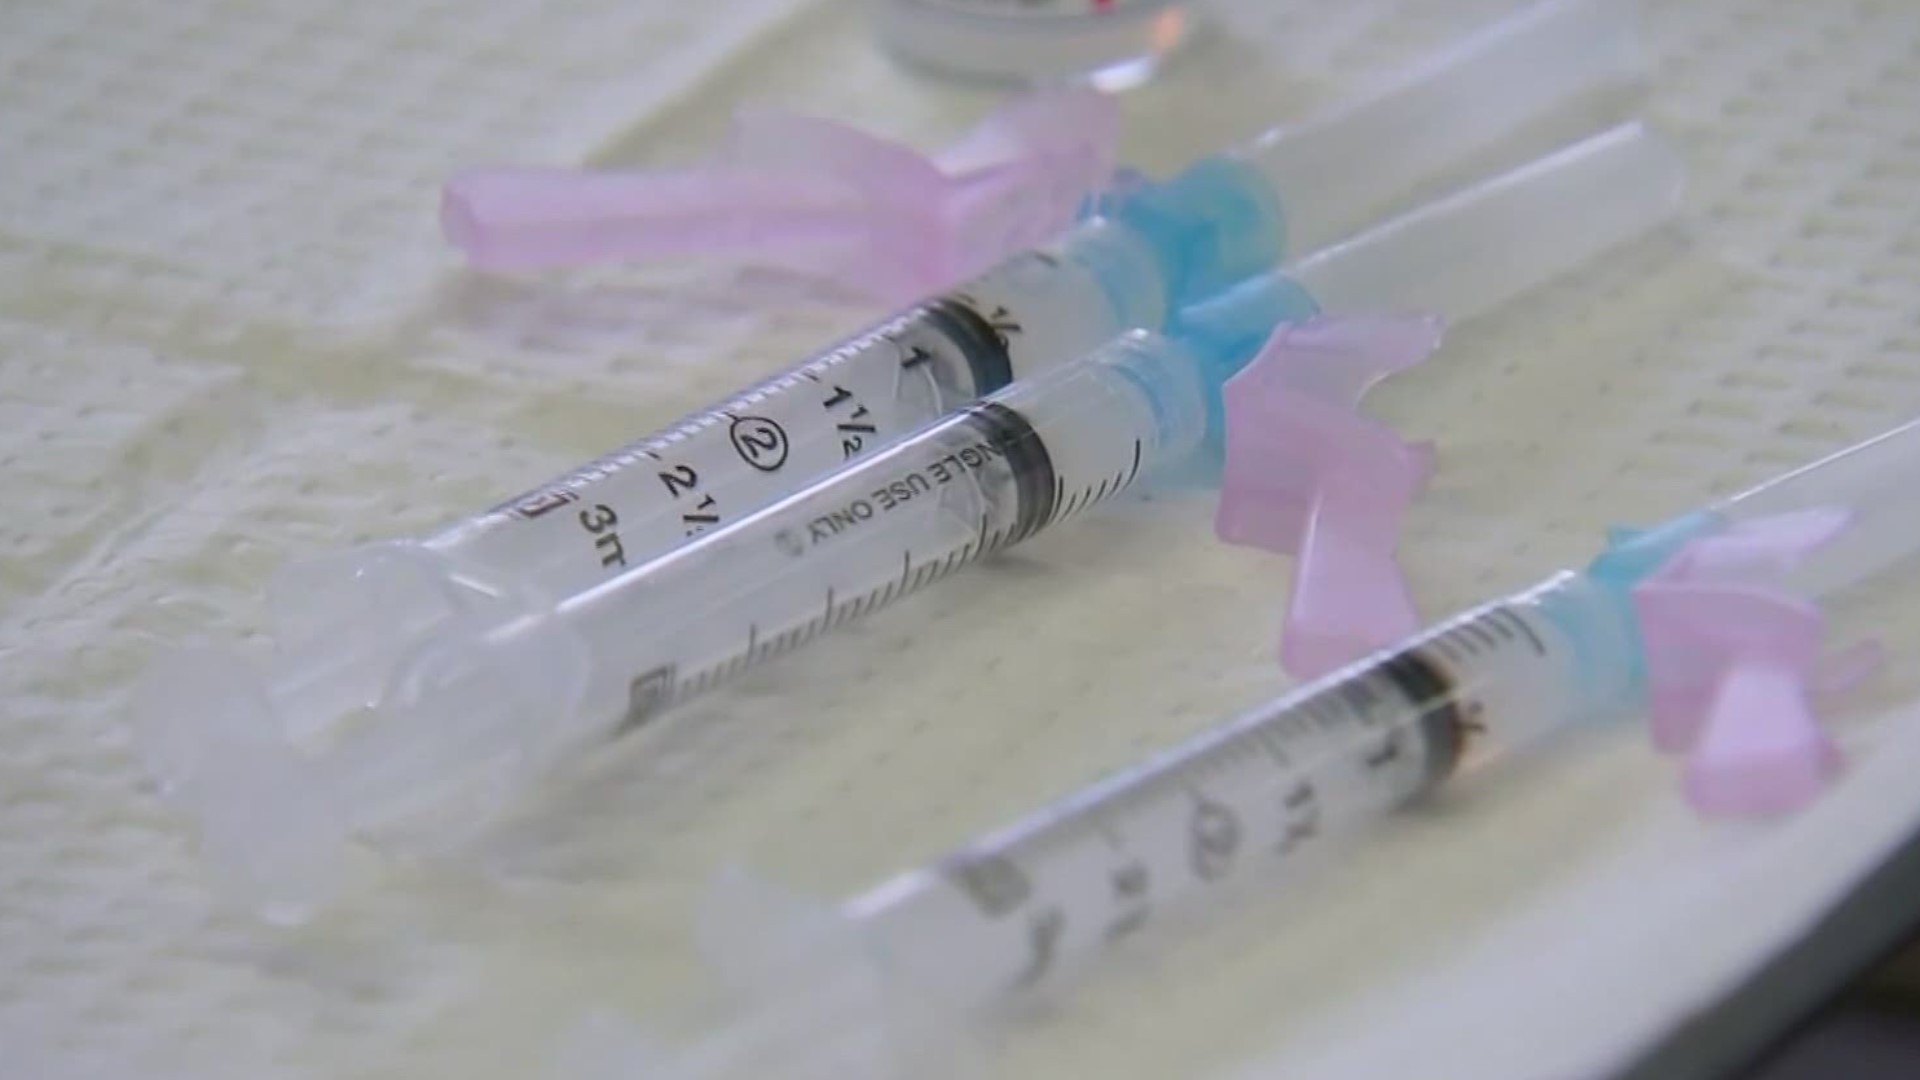 The Governor is urging people to take the vaccine as it becomes available.